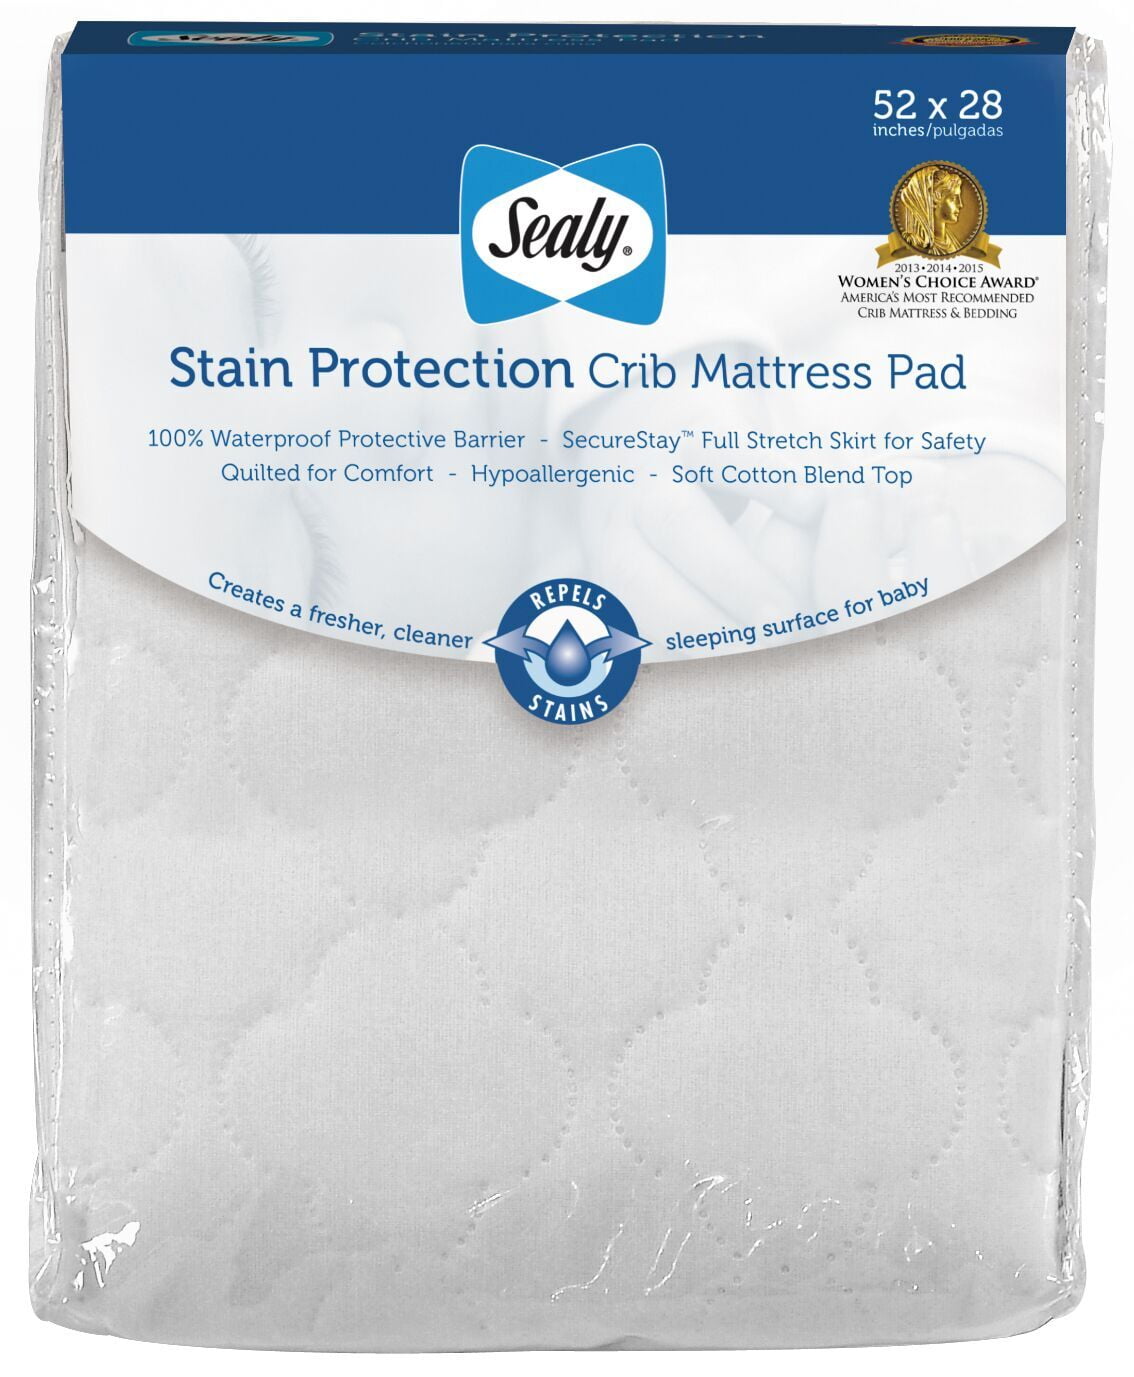 sealy stain repel and release